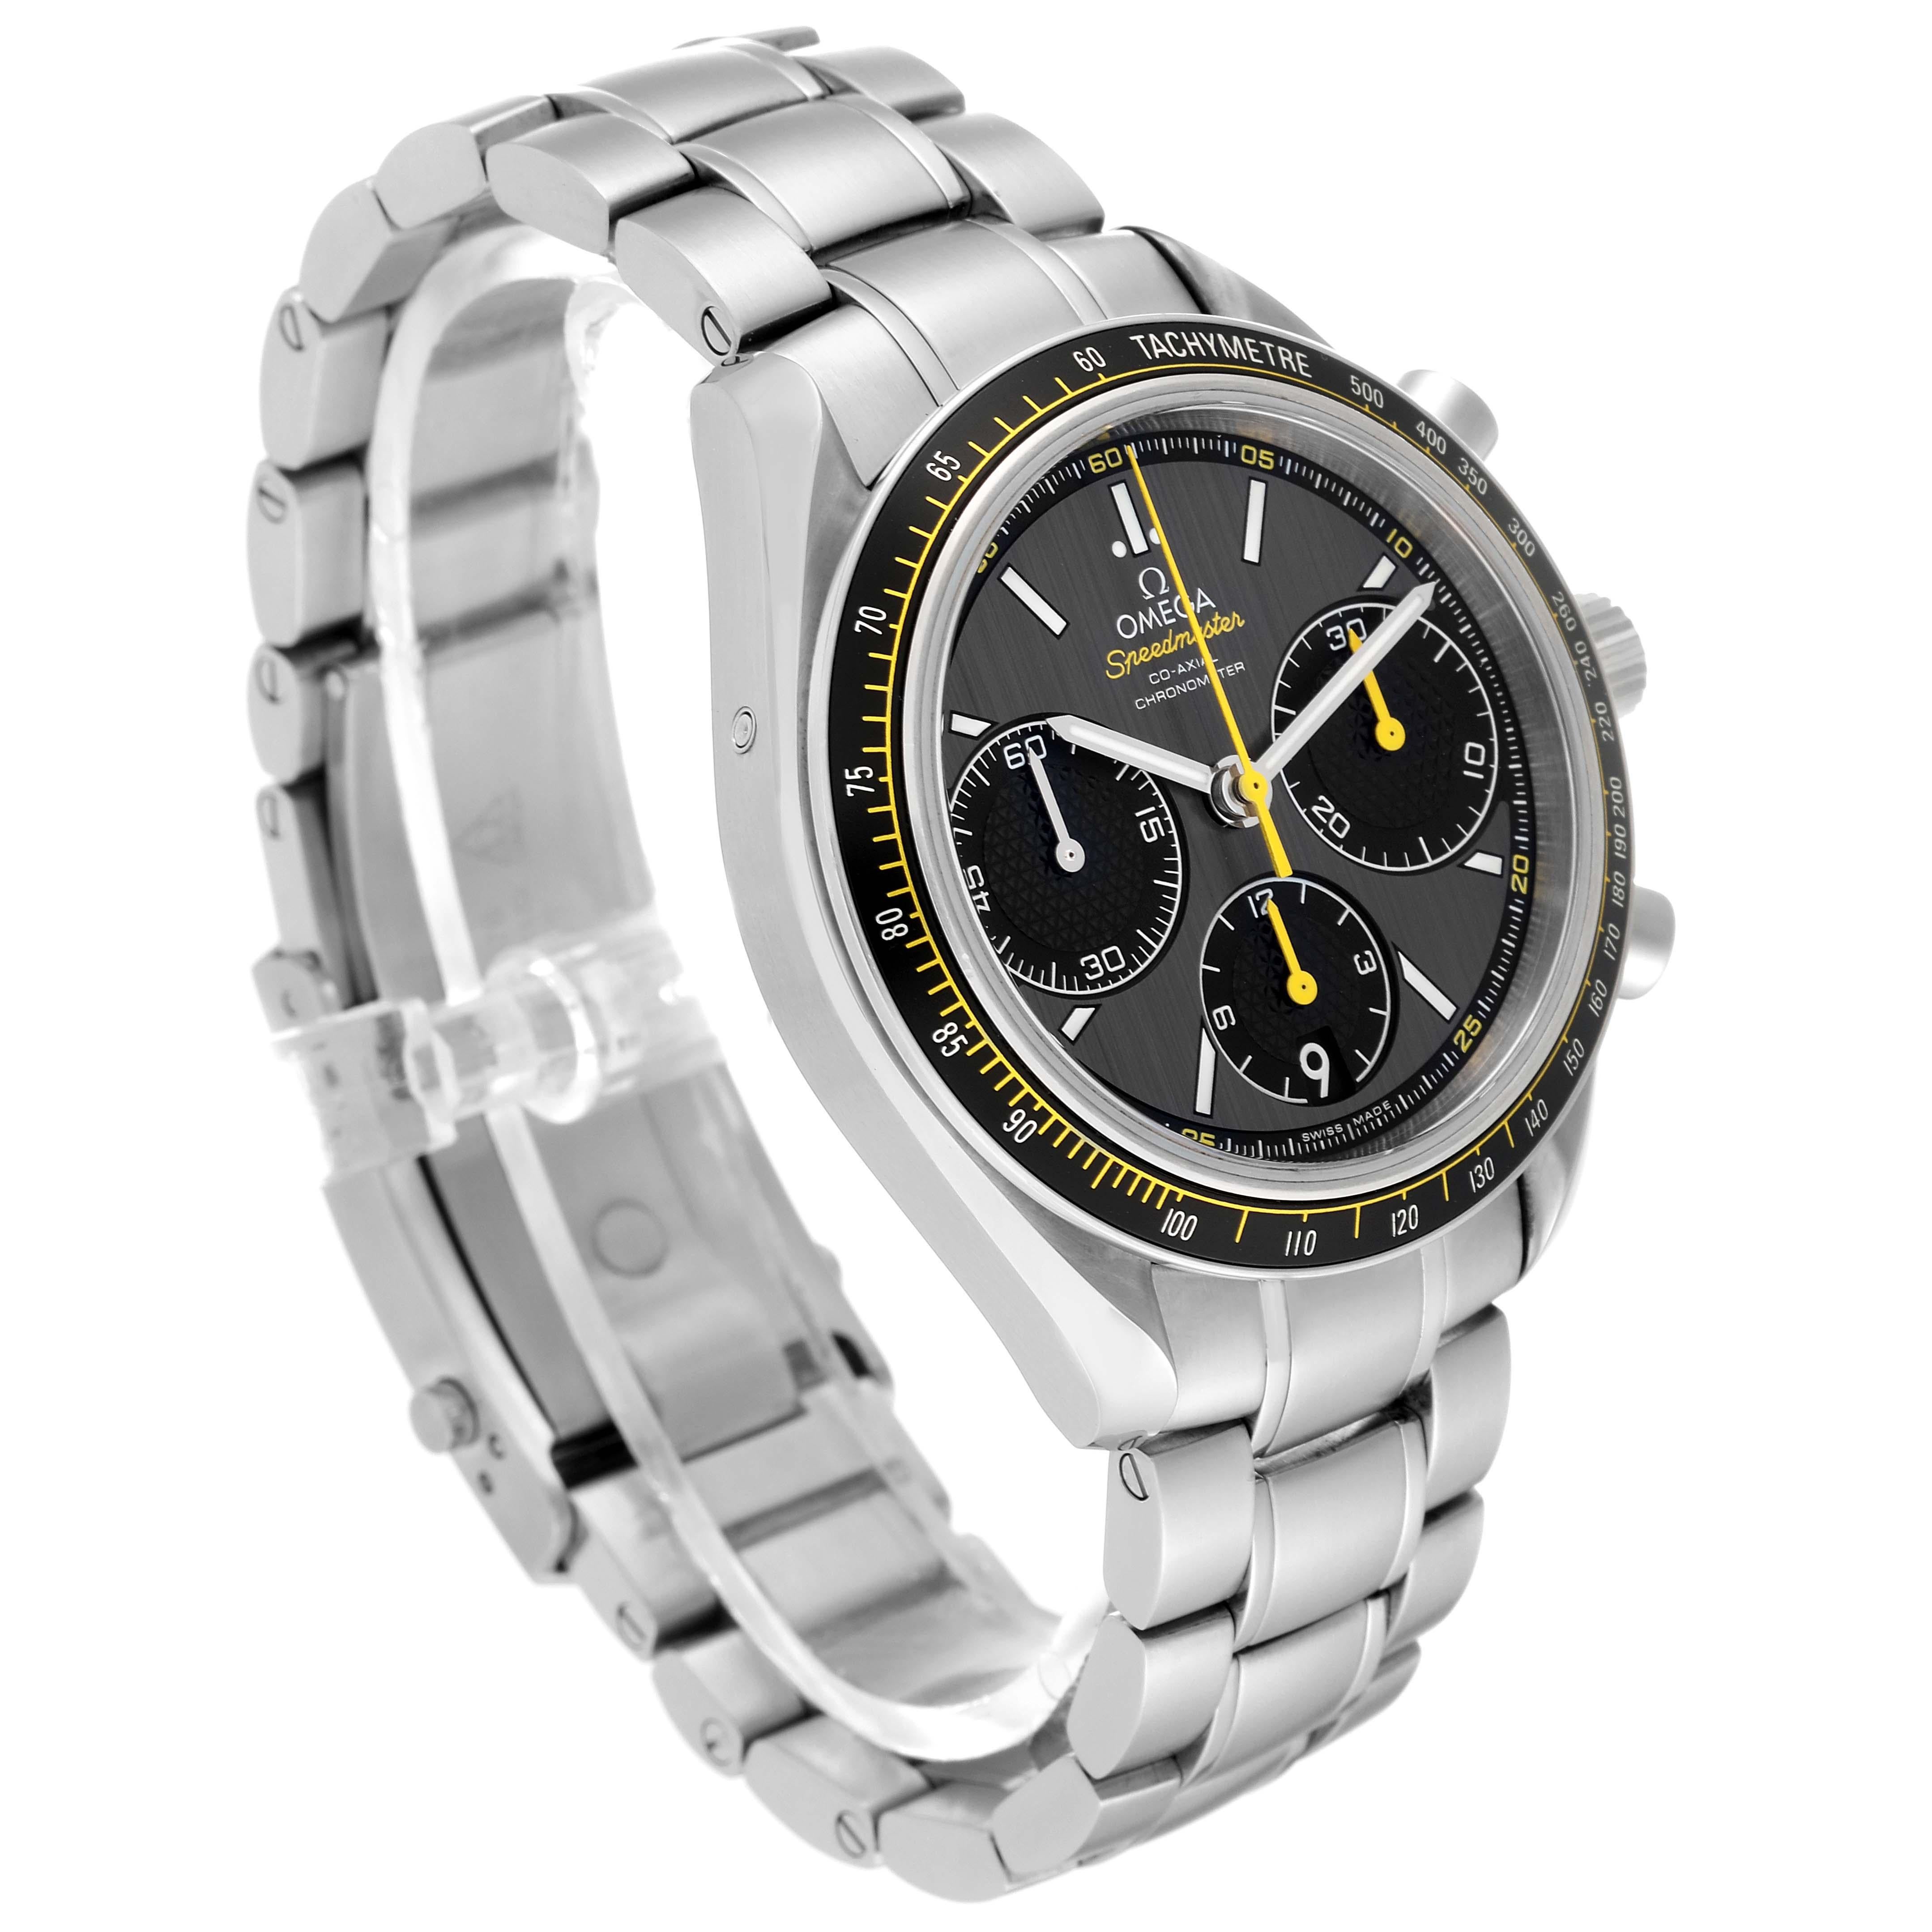 Omega Speedmaster Racing Co-Axial Steel Mens Watch 326.30.40.50.06.001. COSC-certified Omega automatic chronograph movement with a column-wheel mechanism, a Co-Axial Escapement, and a silicon balance spring. Caliber 3330. Stainless steel round case